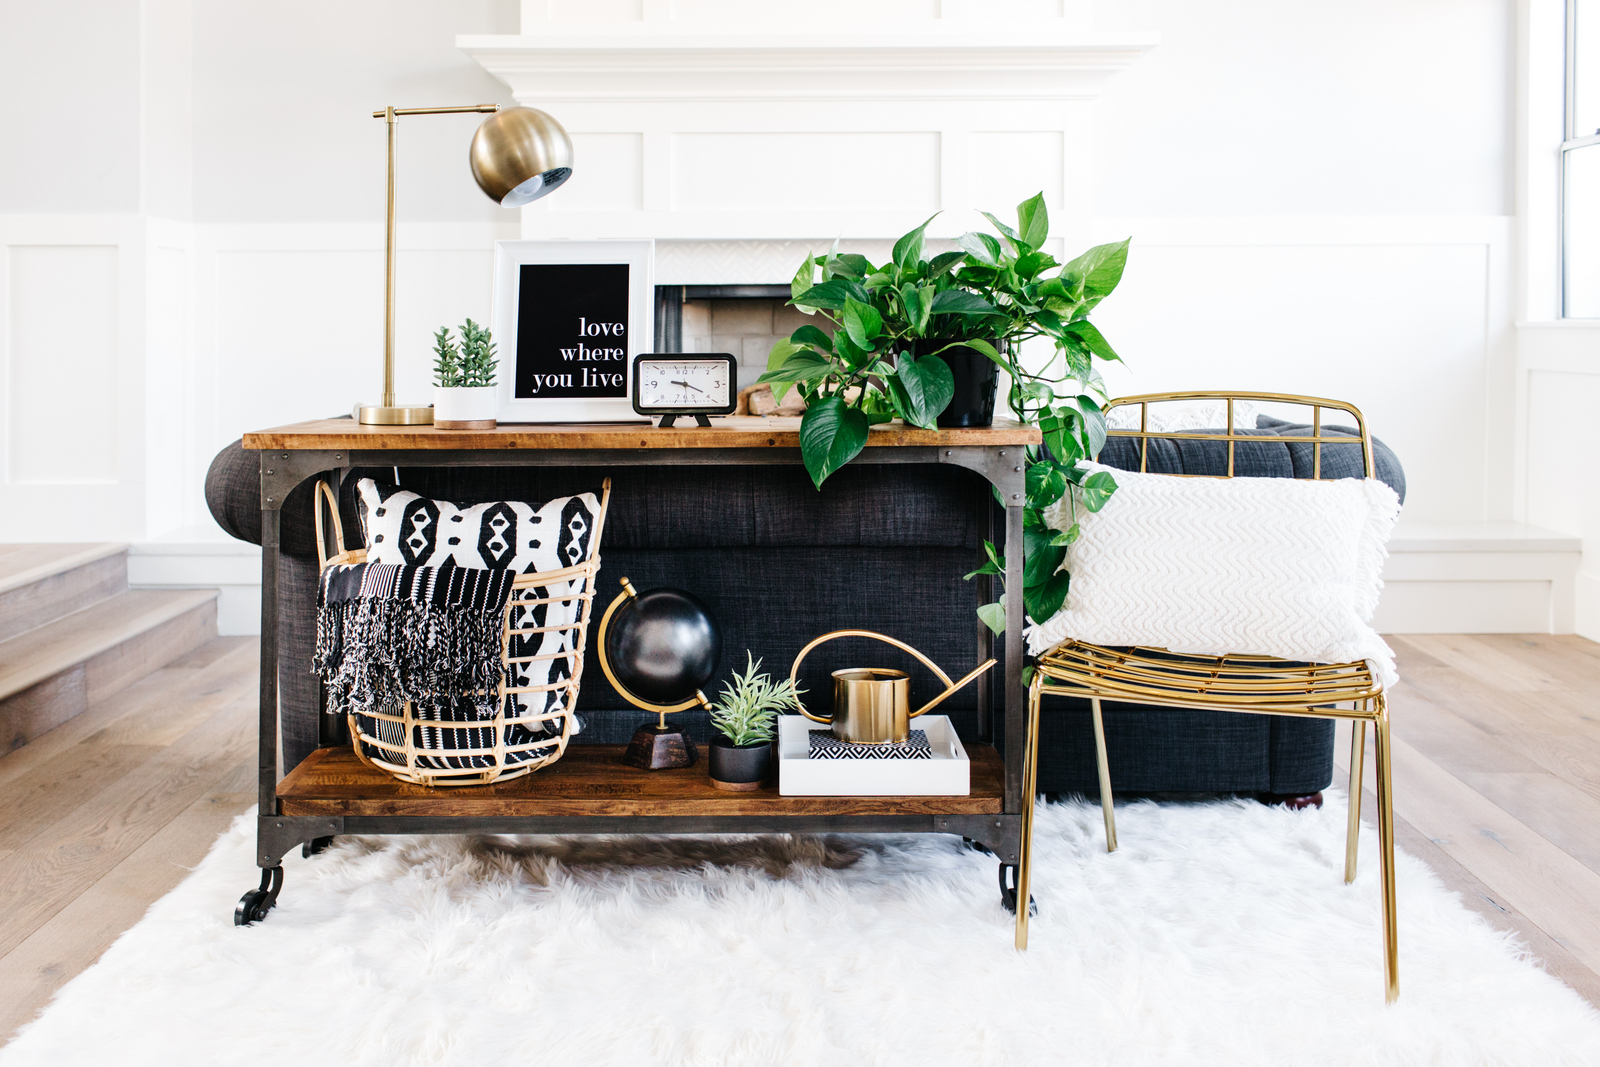 3 Stylish Ways to Style a Console Table - The TomKat Studio for HGTV